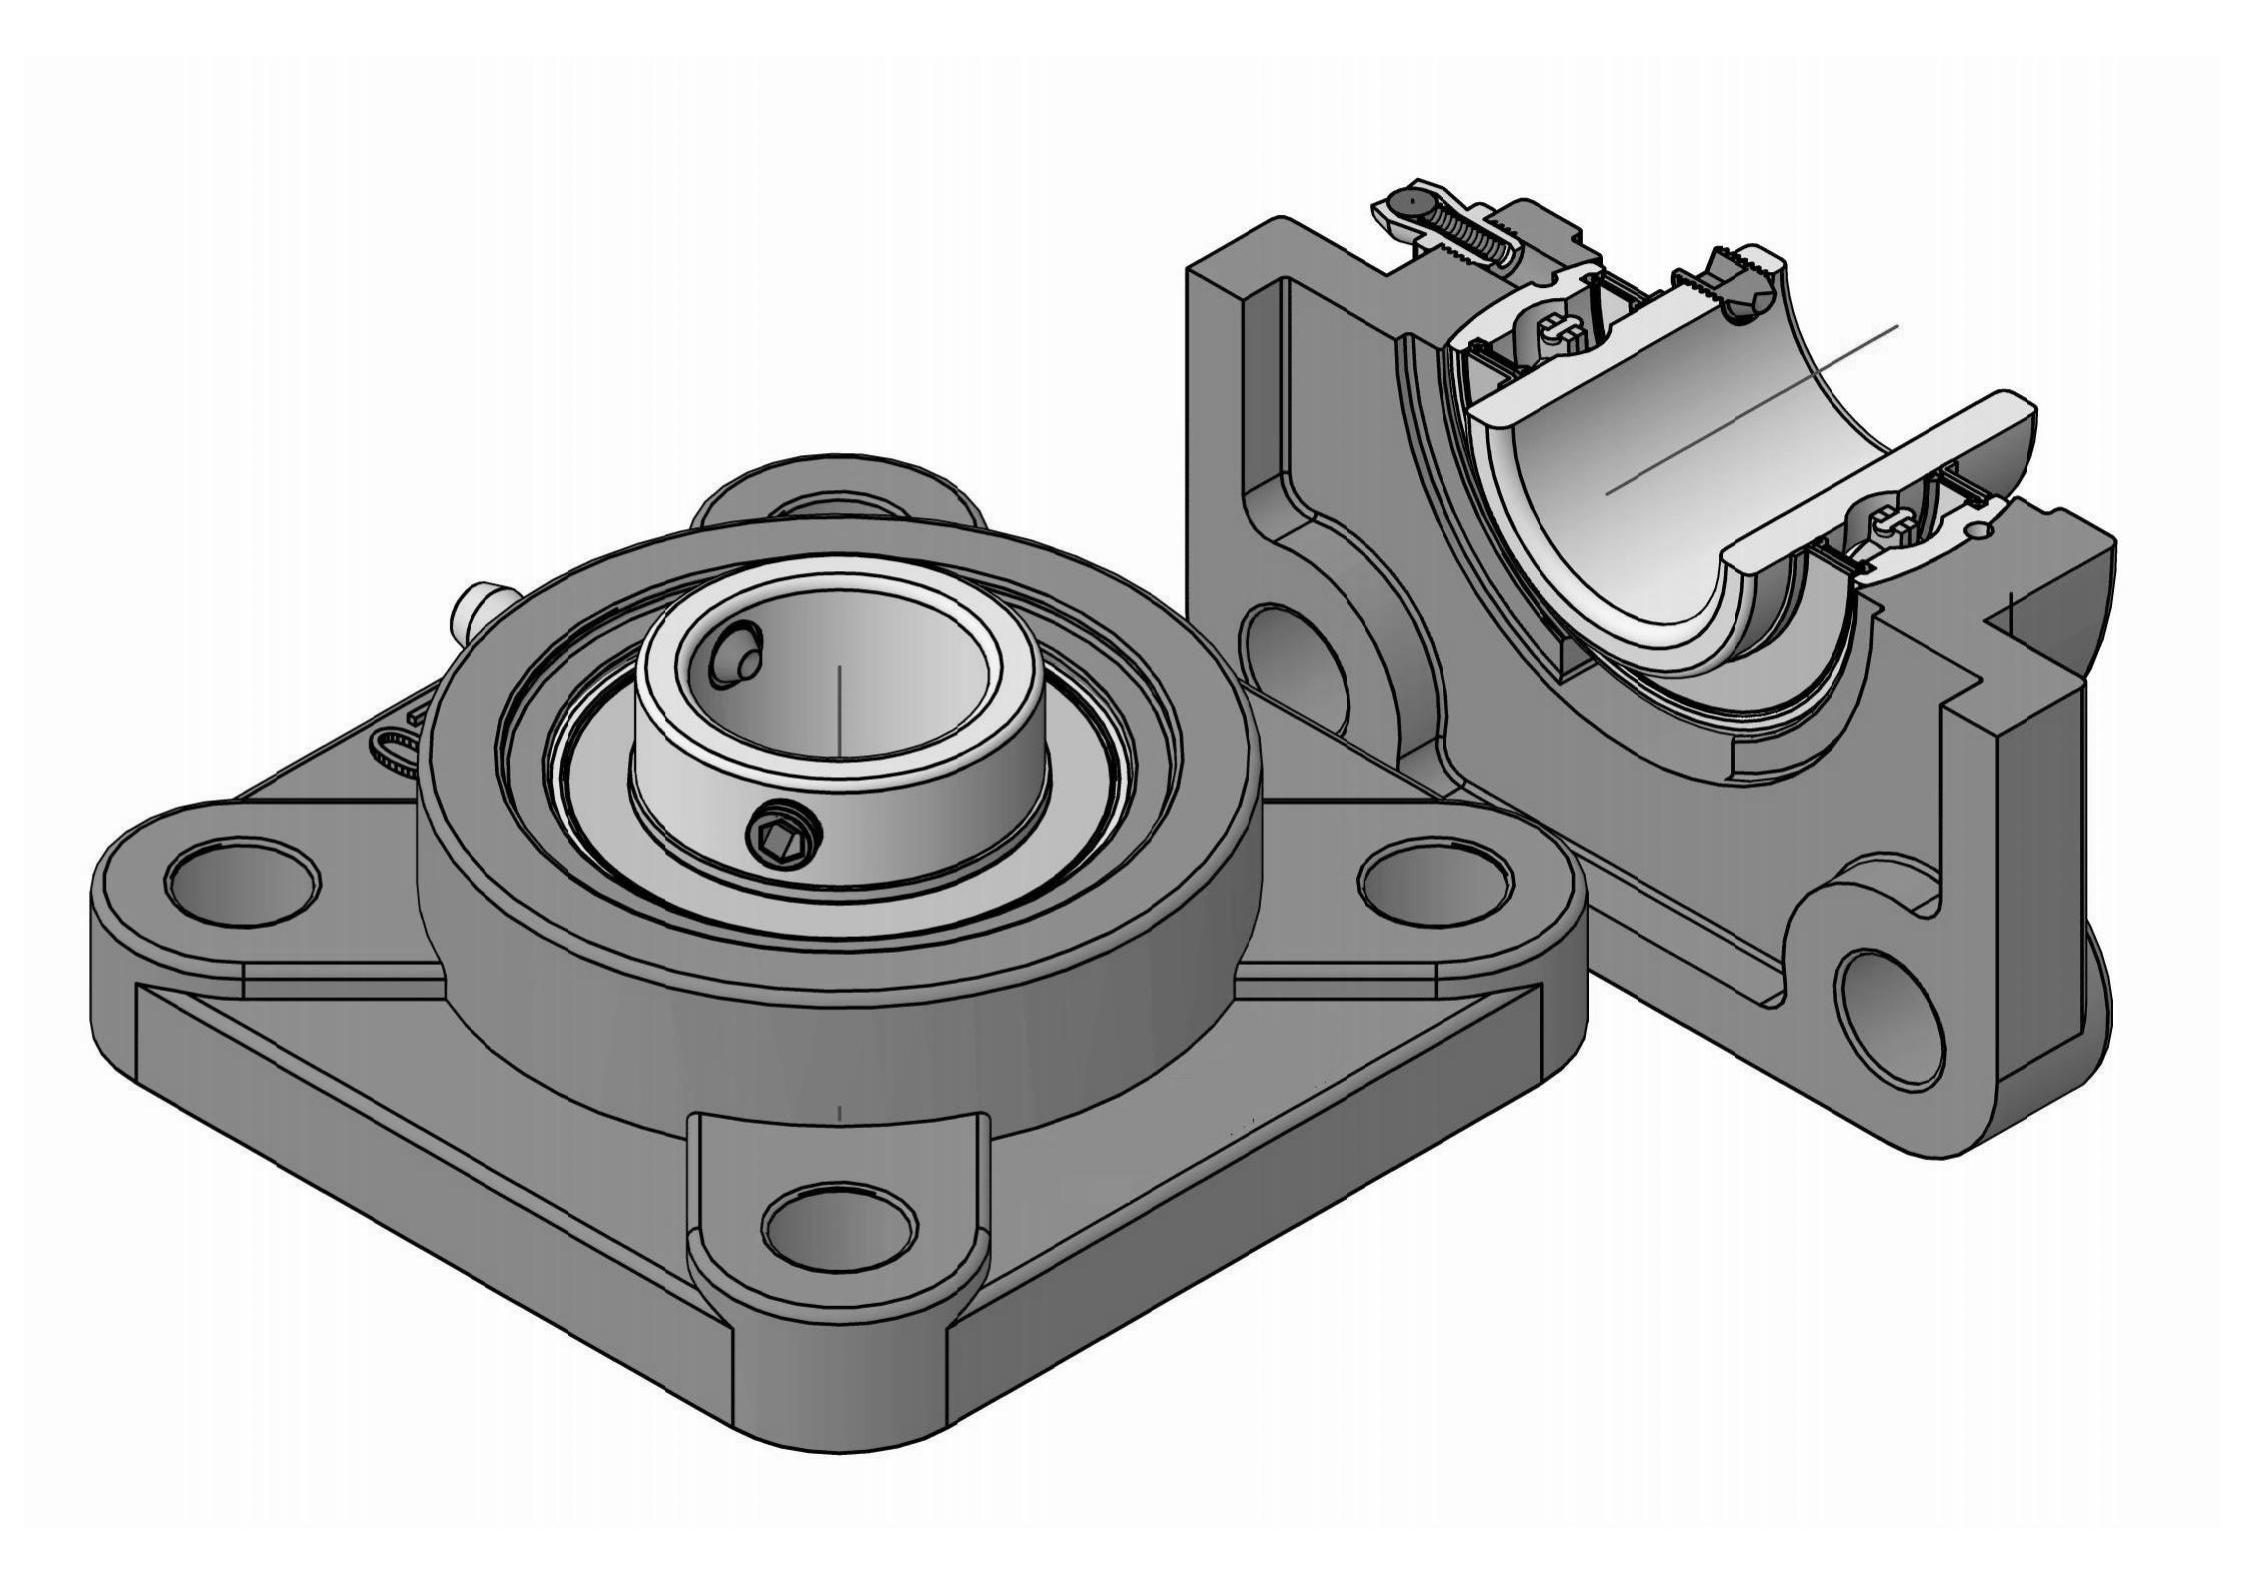 UCFX11-35 four Bolt Square flange bearing units with 2-3/16 inch bore